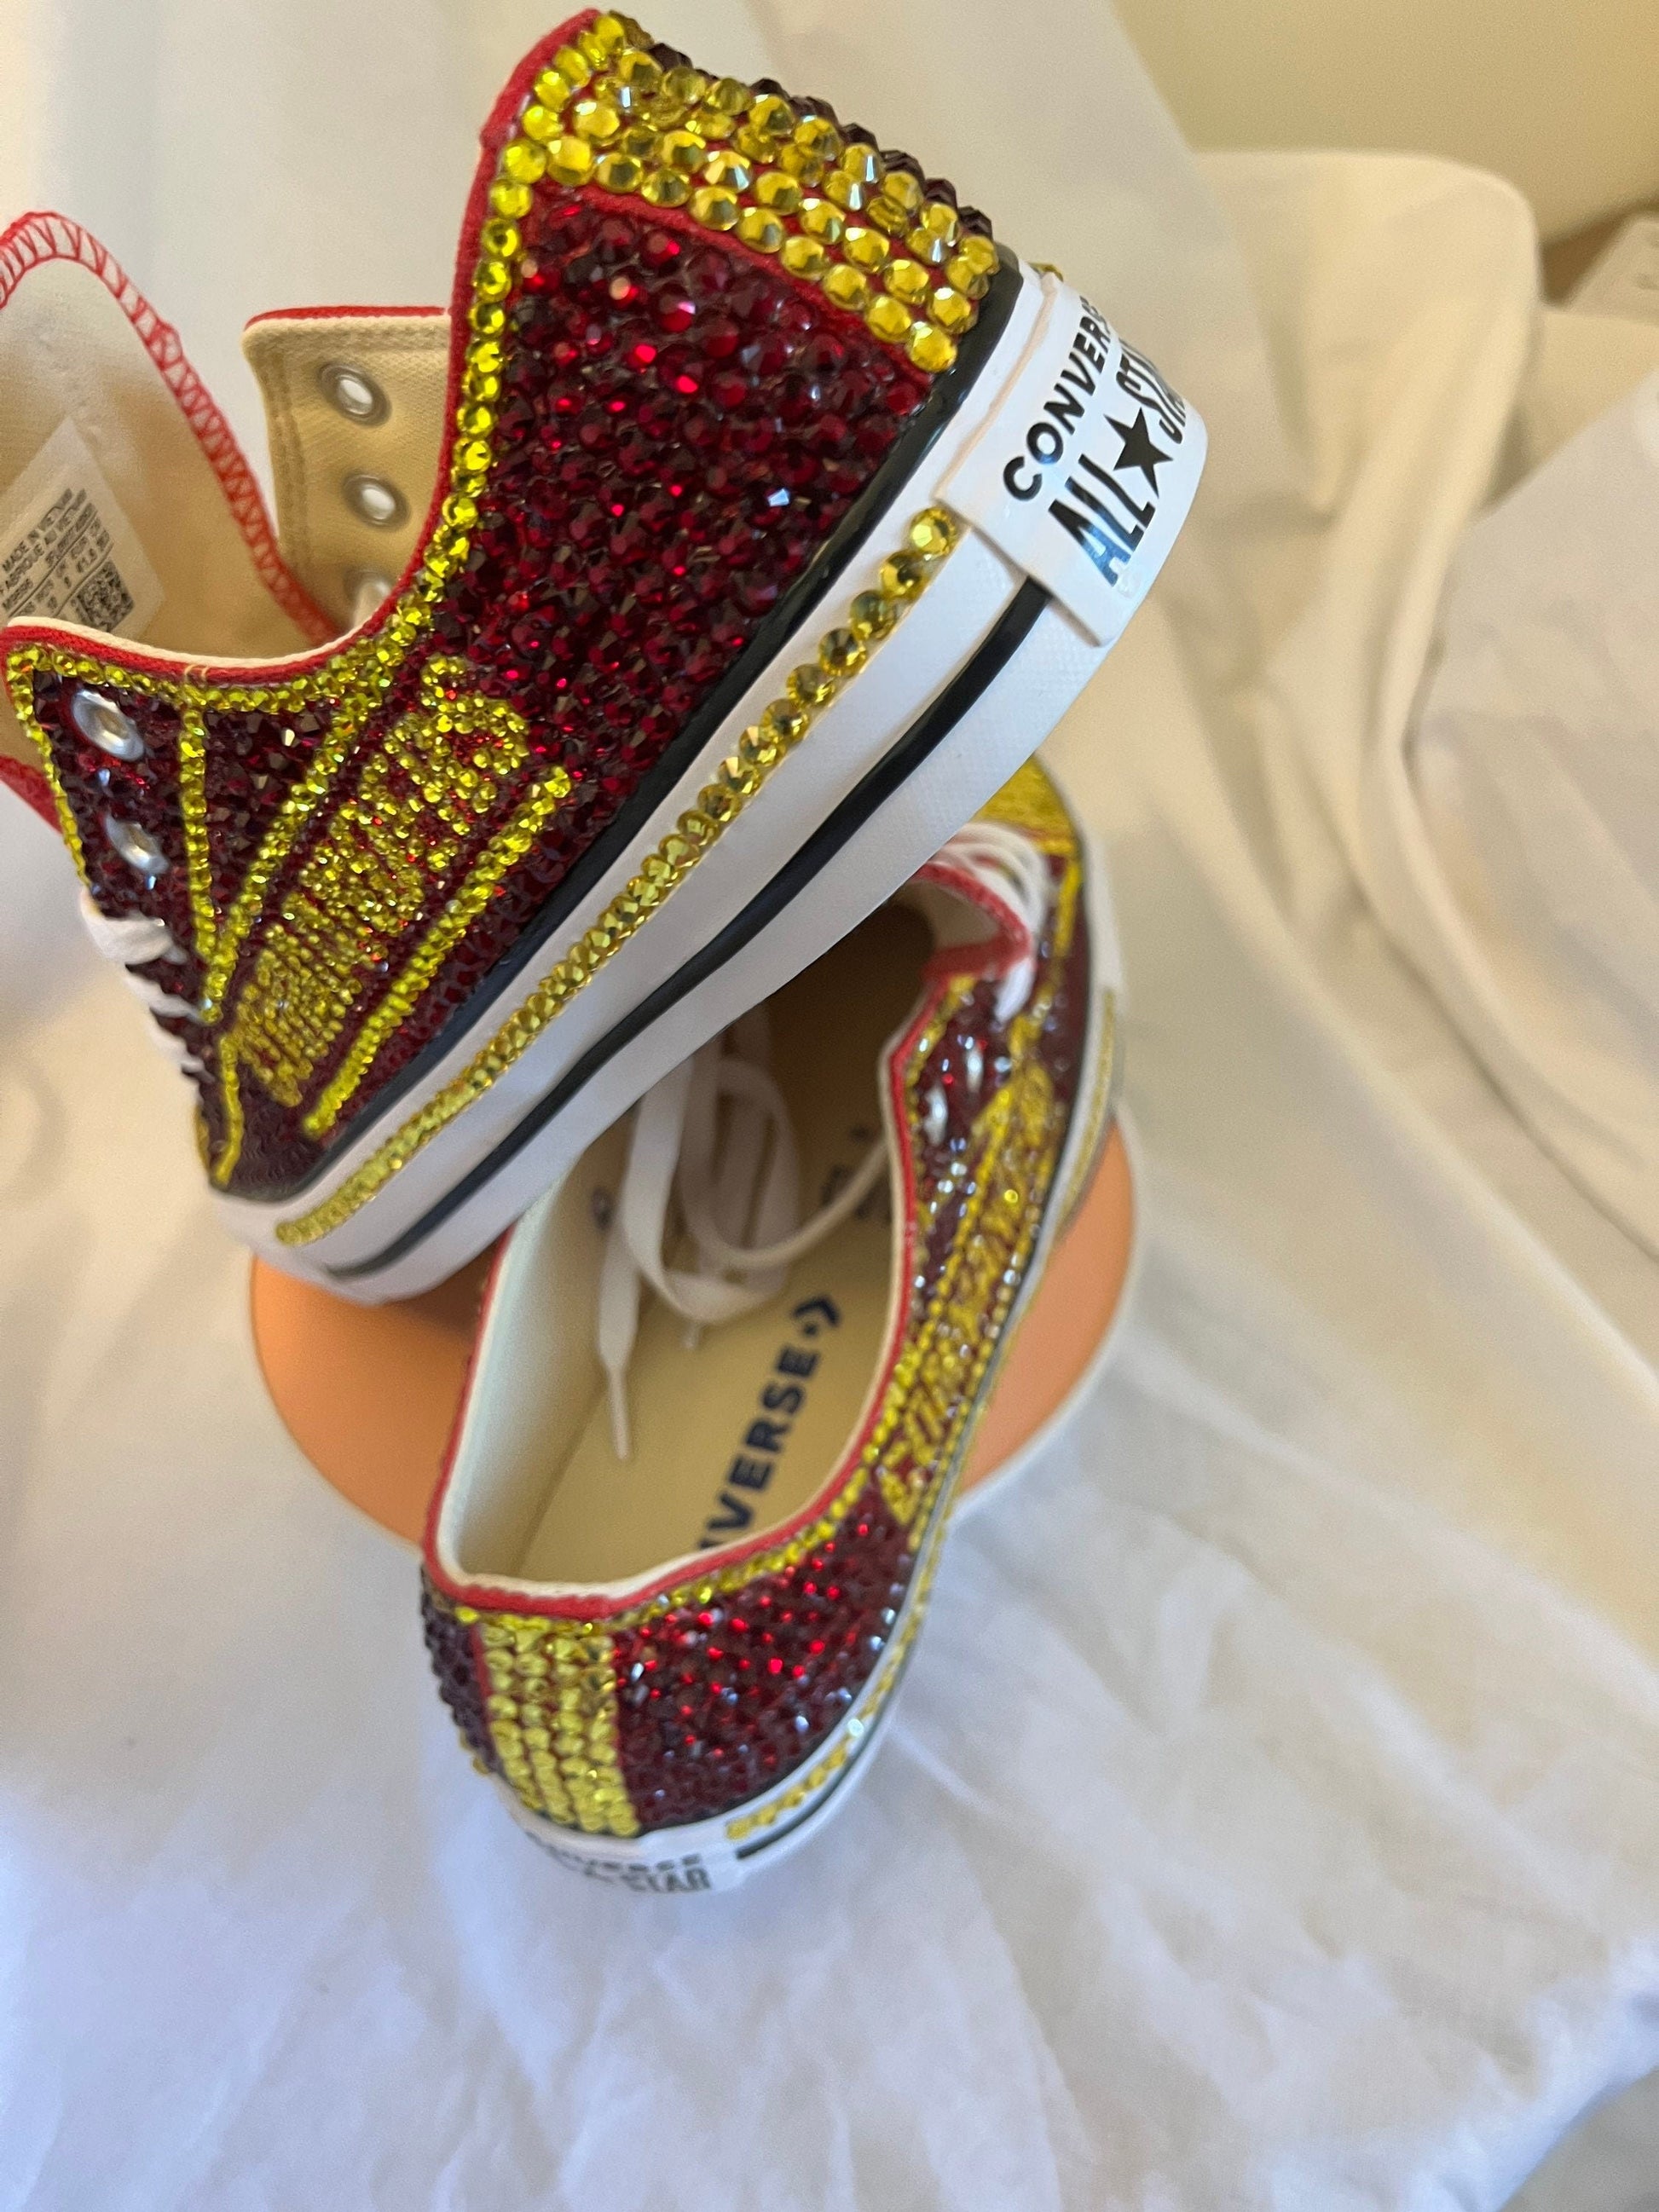 NFL/NCAA Rhinestoned Low Top Converse Tennis shoes.